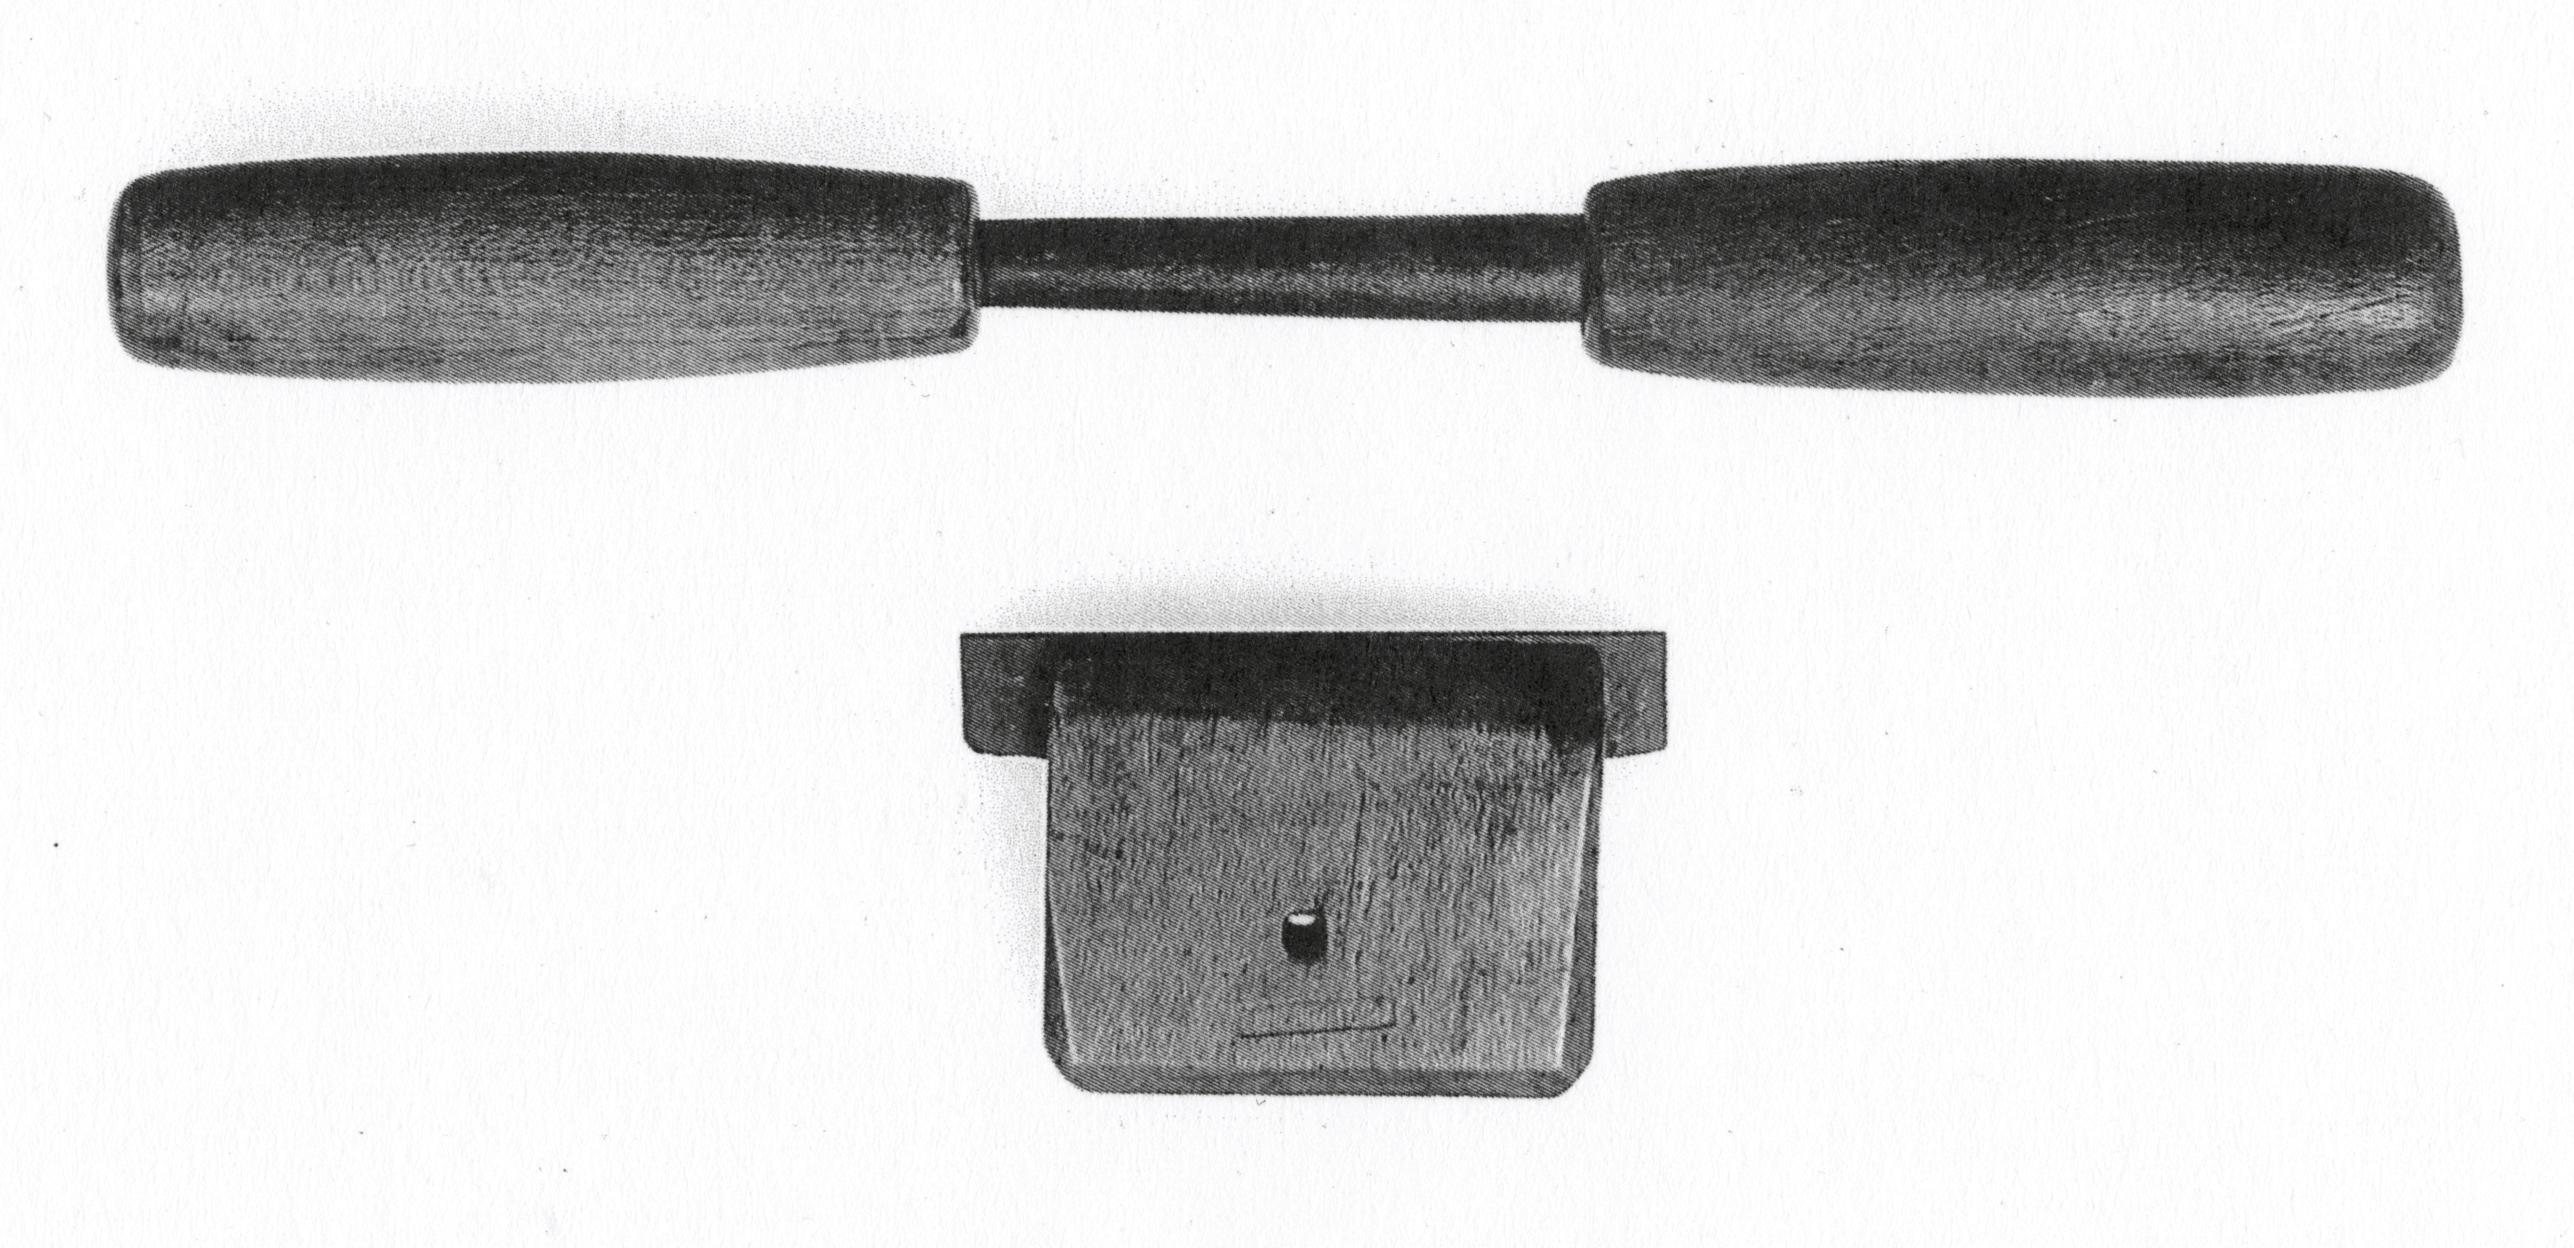 Example of a scraper and a burnisher.